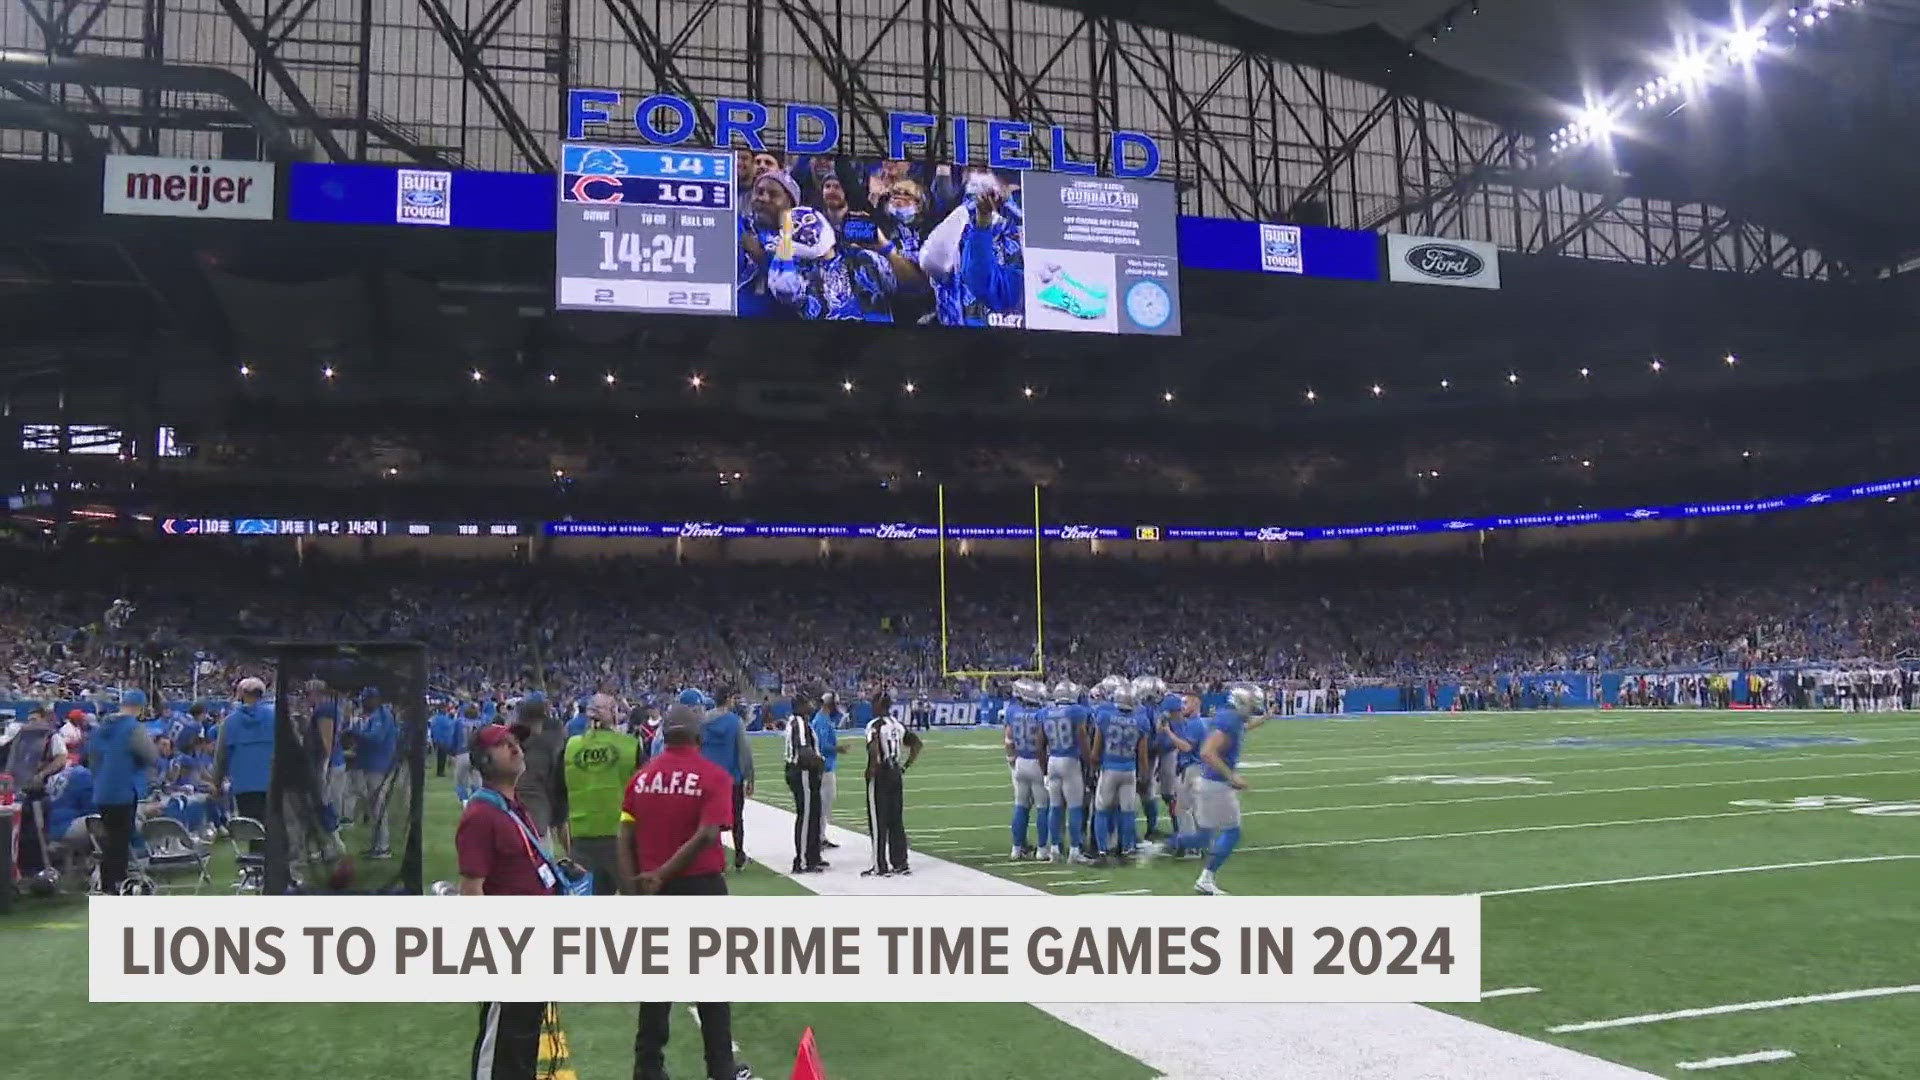 Lions to play five prime time games in 2024 season